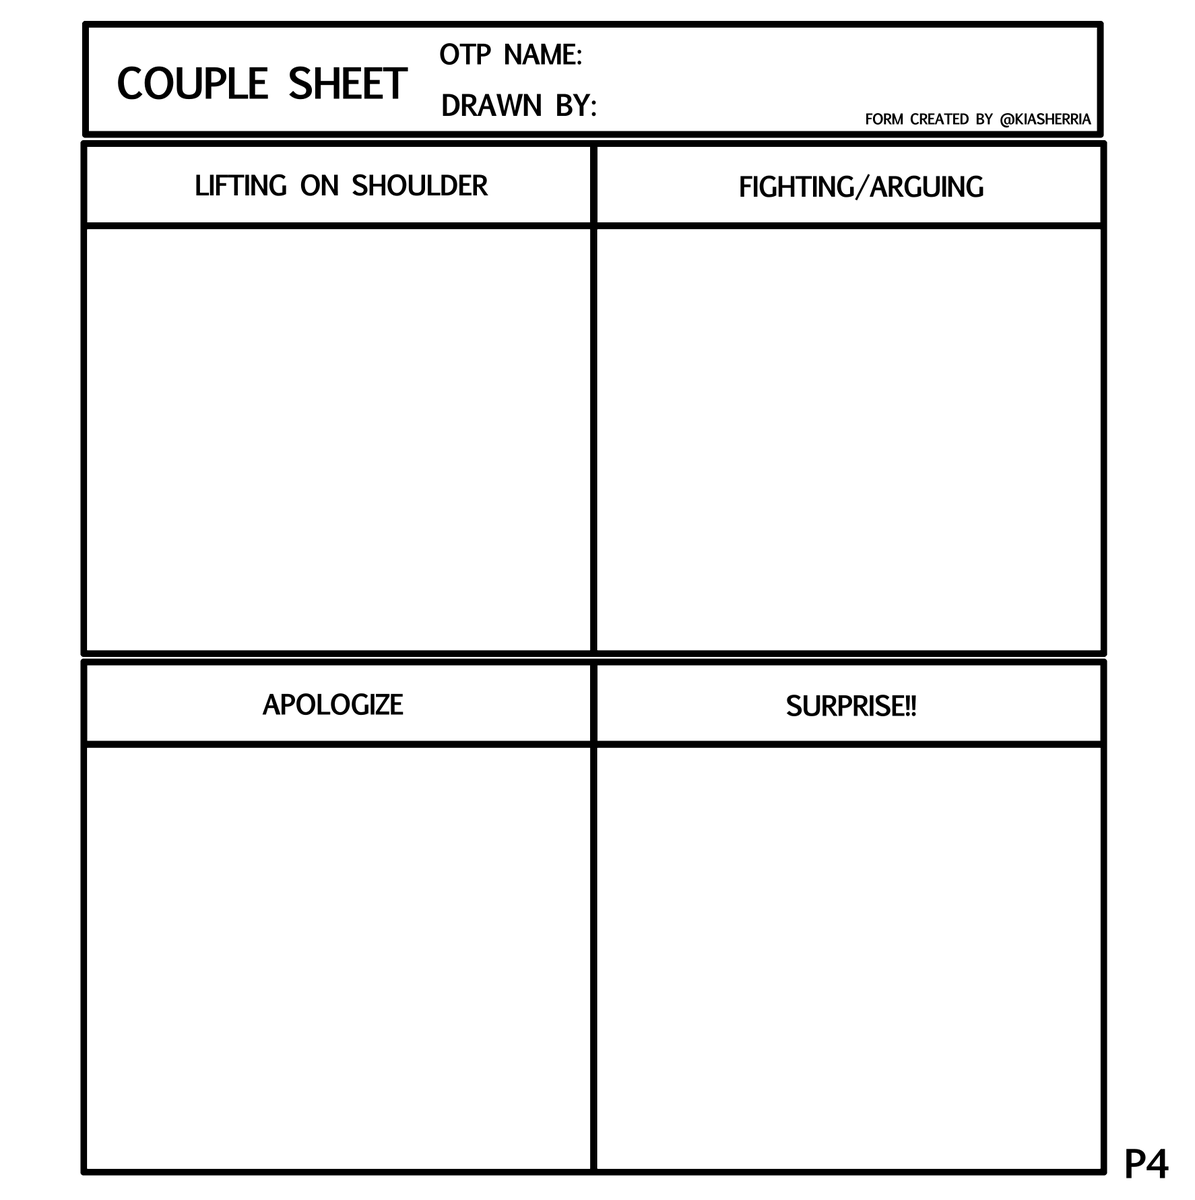 A cute sheet to fill out for your ship and OTP. ?
Please feel free to take those and use or modify the options.
Those are large PNG. You can just draw under the layers, the frames are already filled. (The black parts are transparent for your layers.)
Have fun?
#16OTPChallenge 